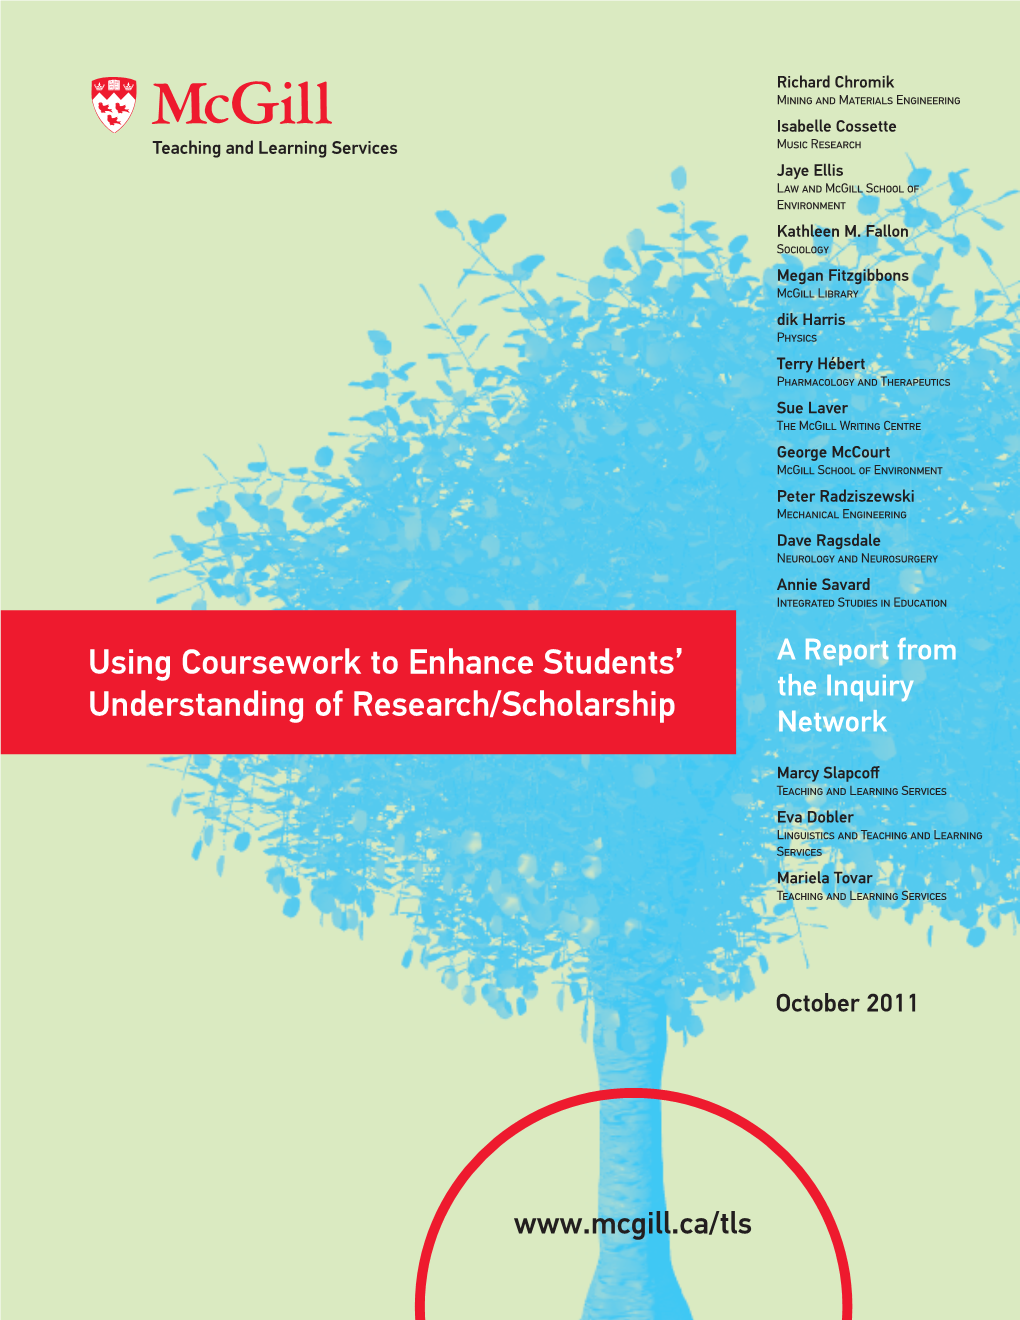 Using Coursework to Enhance Students' Understanding of Research/Scholarship